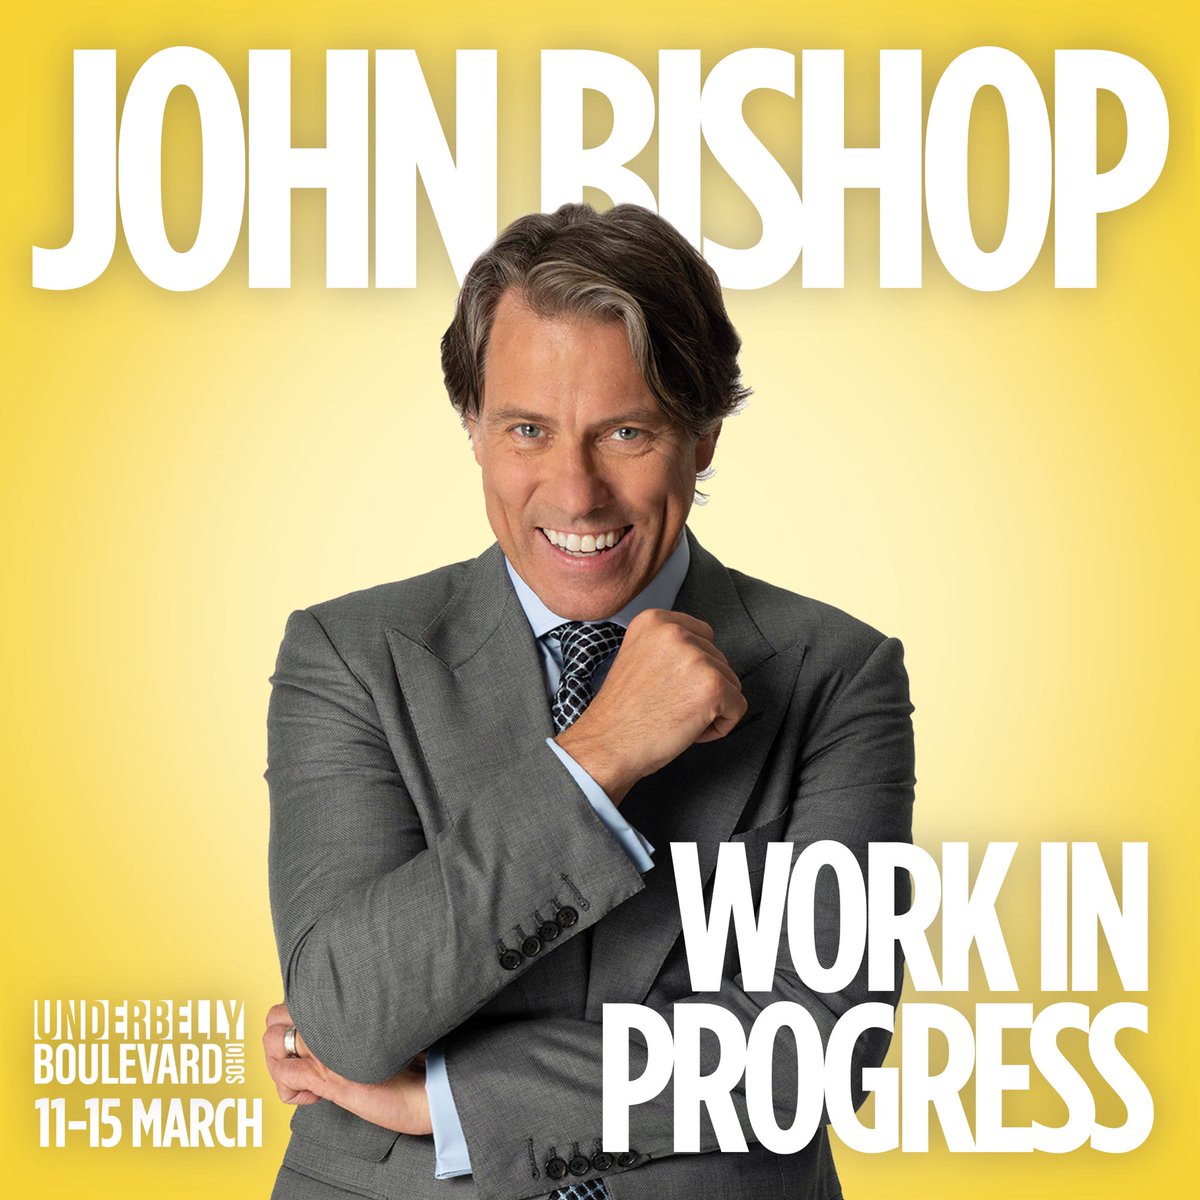 Join me for a five-night residency in the heart of Soho at the brilliant Underbelly Boulevard, where I’ll be diving into some exciting new #WorkInProgress……. Tickets on sale today at 10am GMT! Visit johnbishoponline.com or click the link below to grab your tickets: